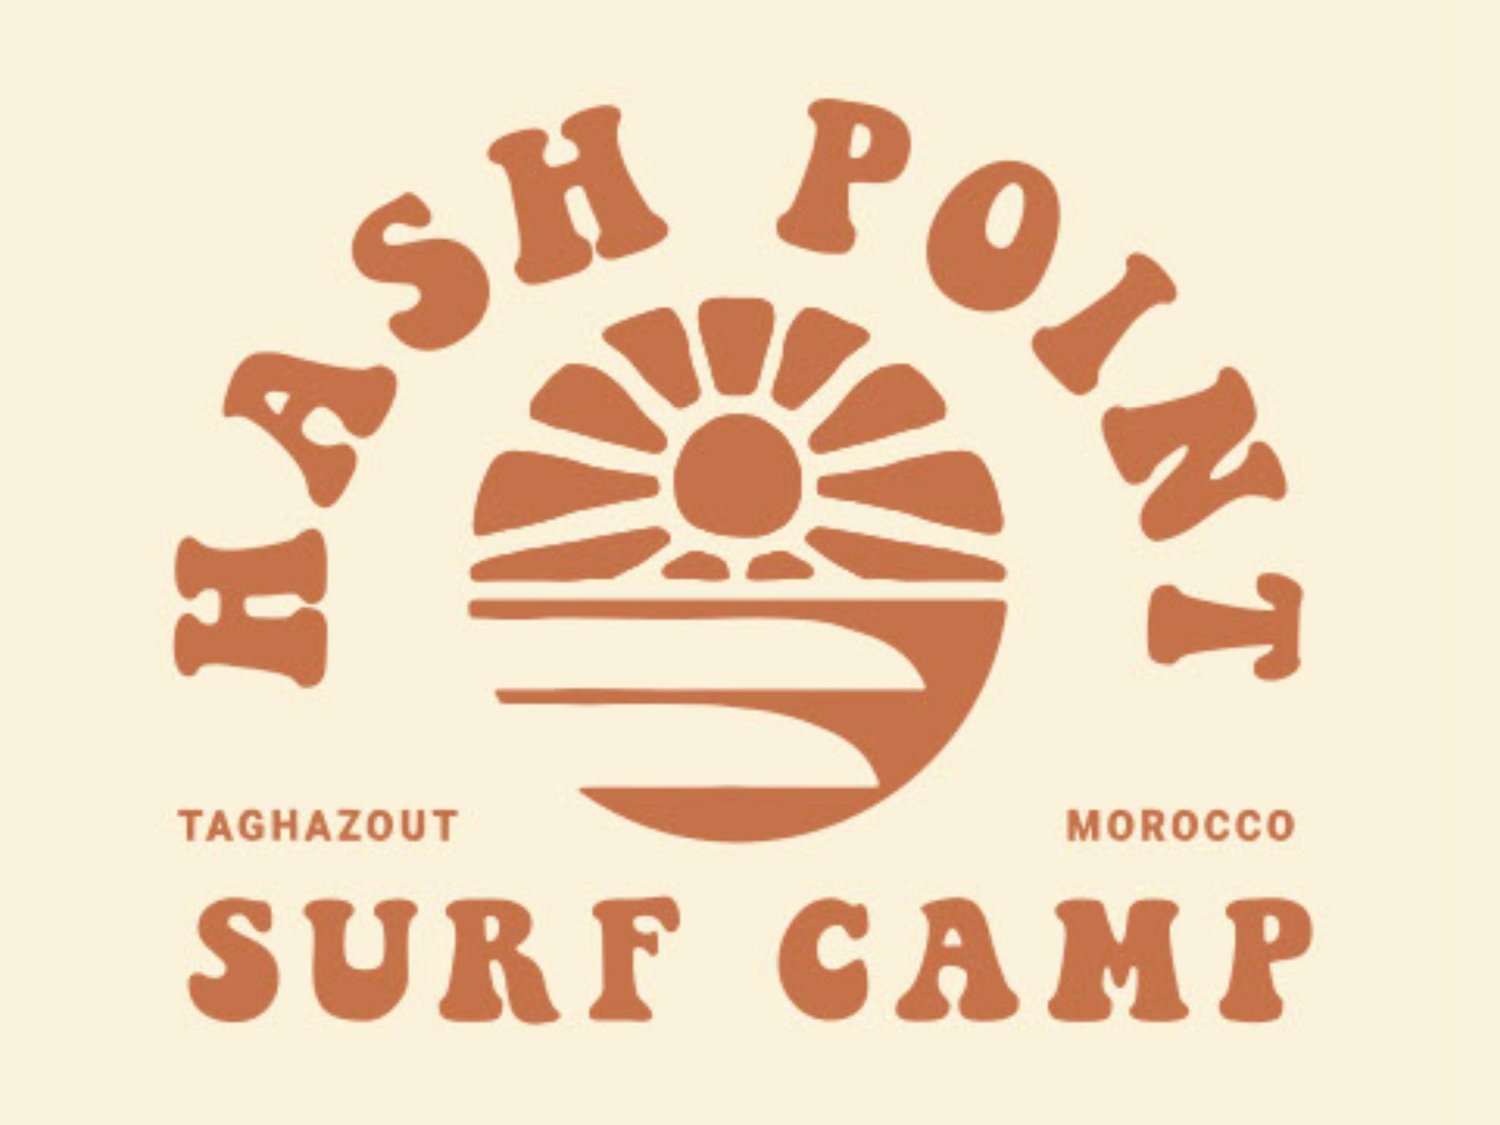 Hashpoint Surf Camp, hotel & surf school Taghazout Morocco